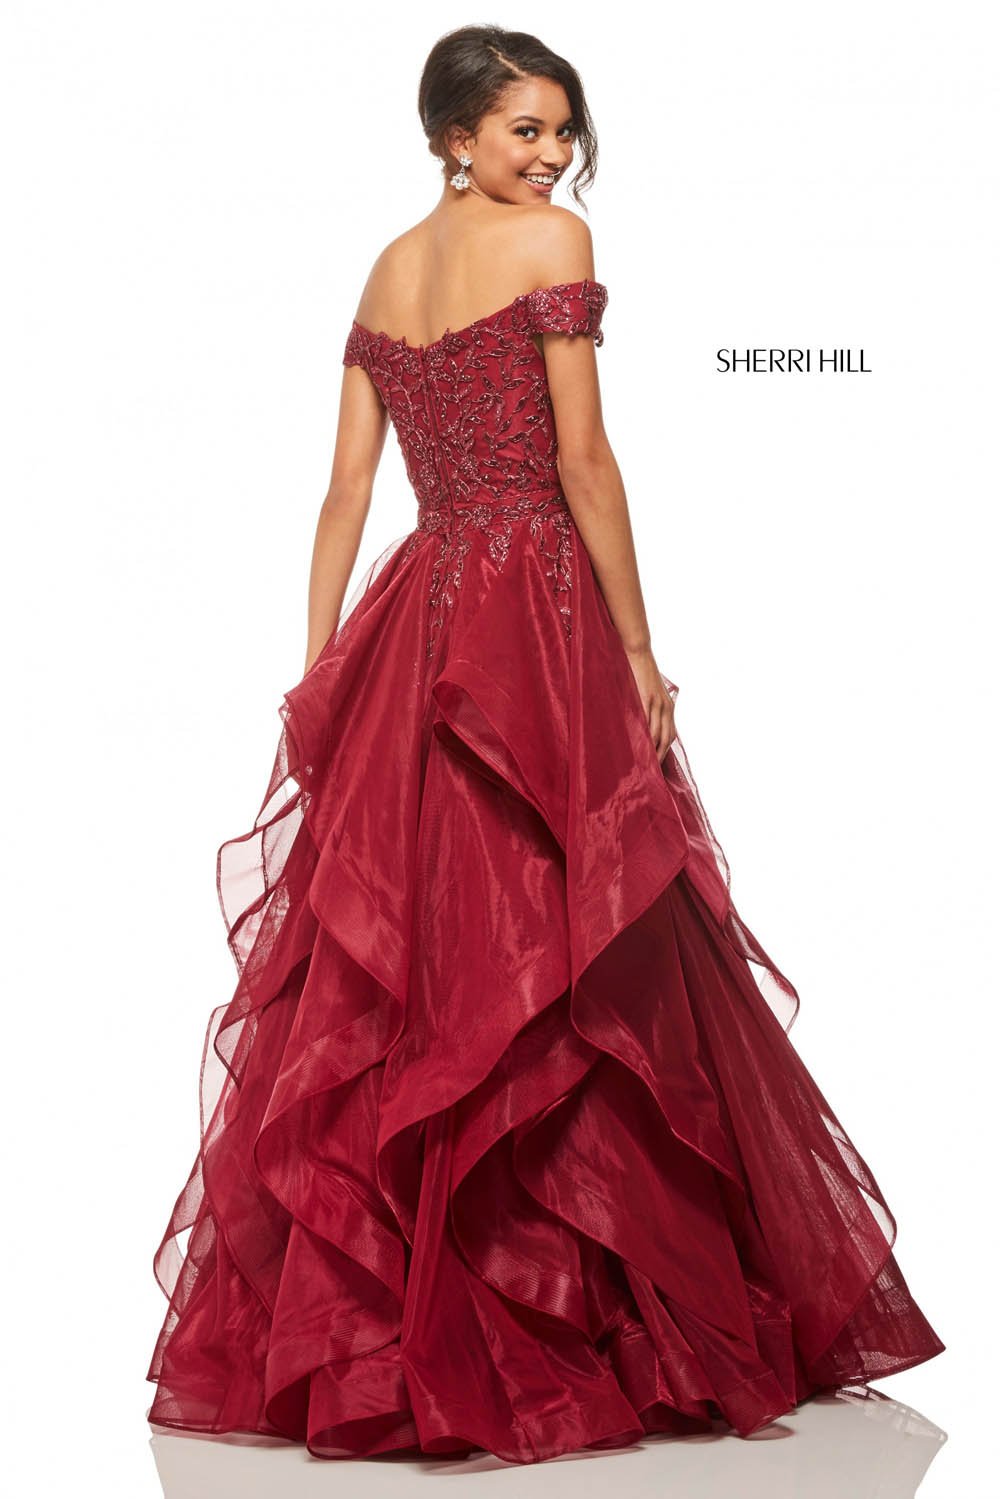 Sherri Hill 52880 dress images in these colors: Navy, Wine, Black, Rose Gold.